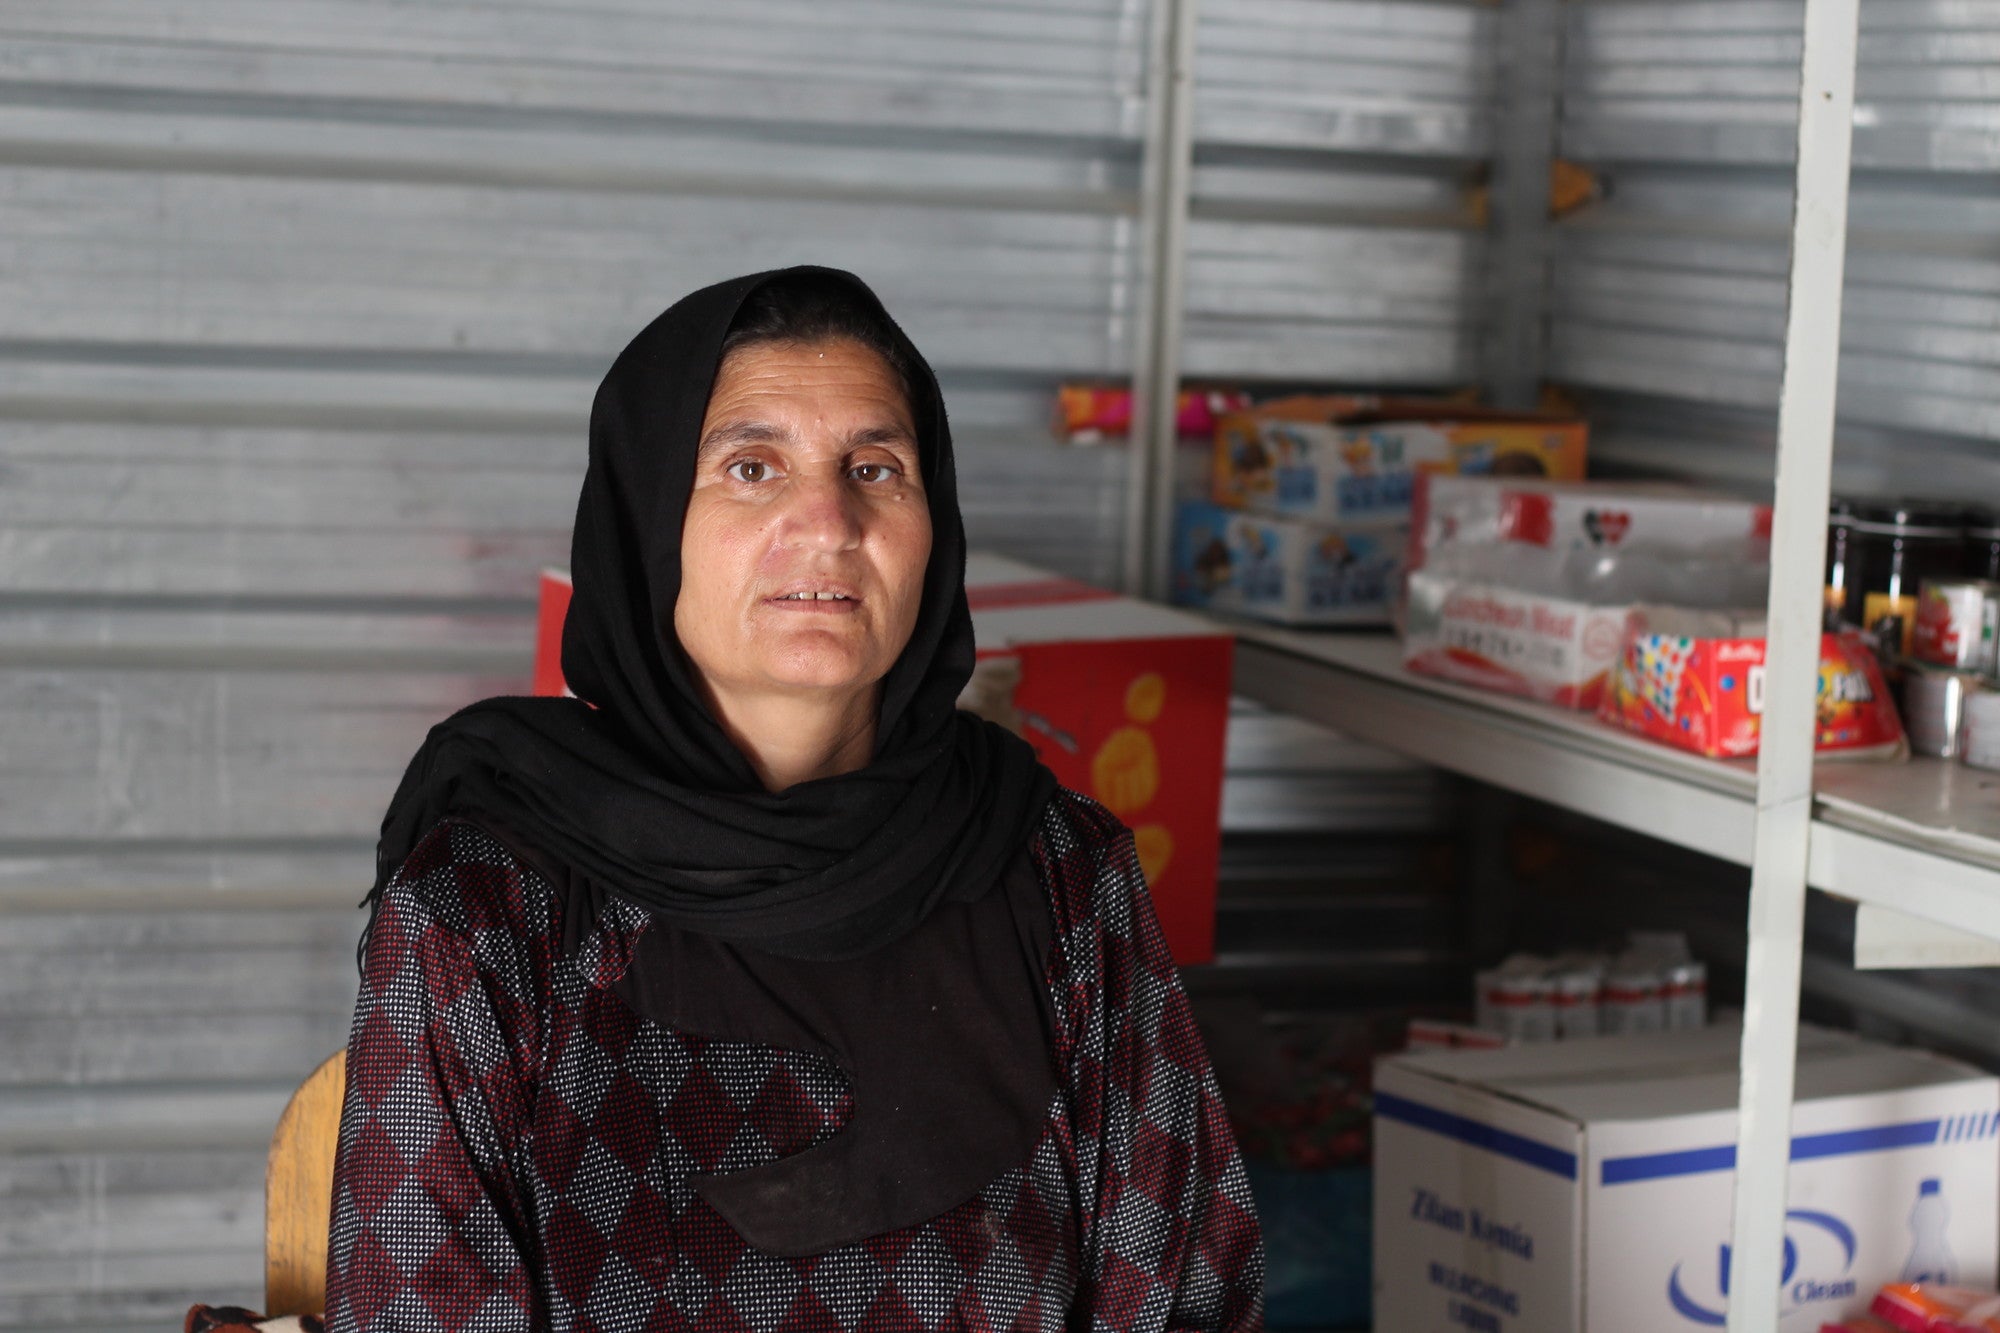 An Iraqi mother sits inside her small shop in Northern Iraq.